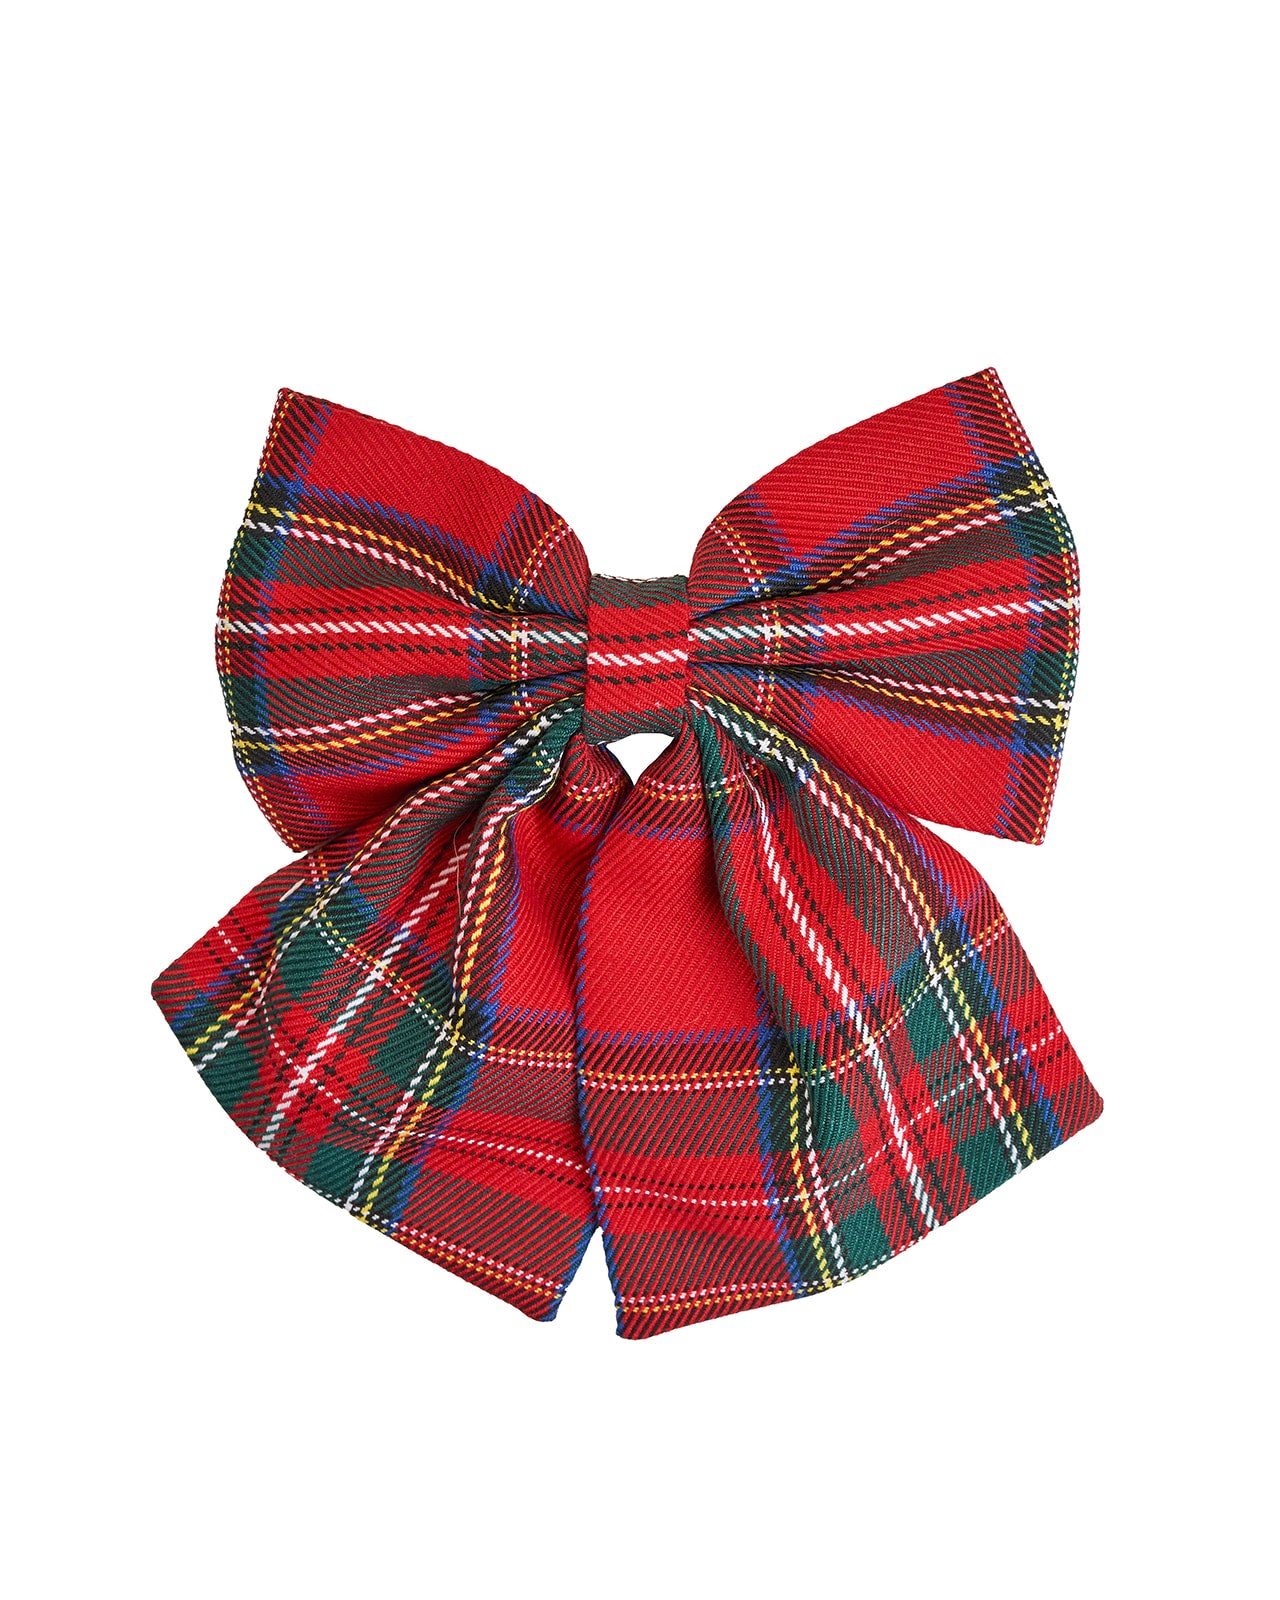 The Holiday Bestie Bow